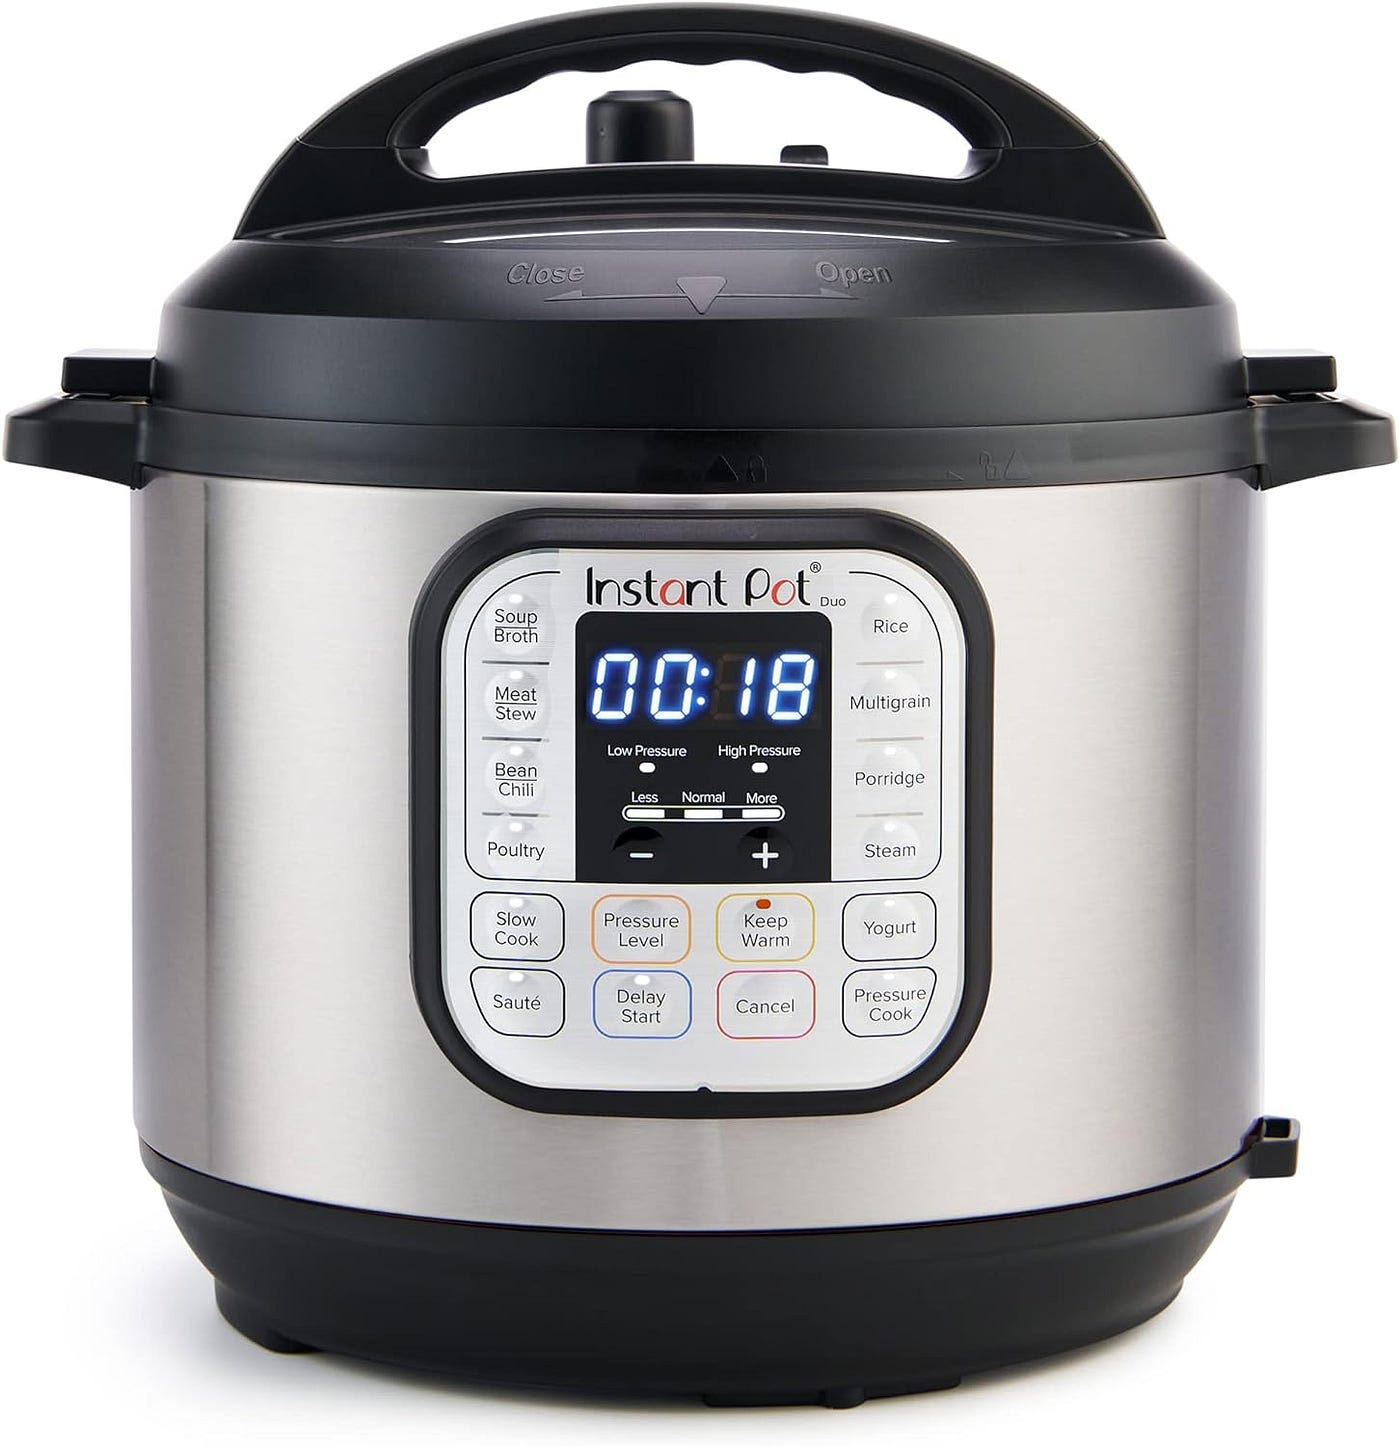 Get the Ultimate Instant Pot for Under $100